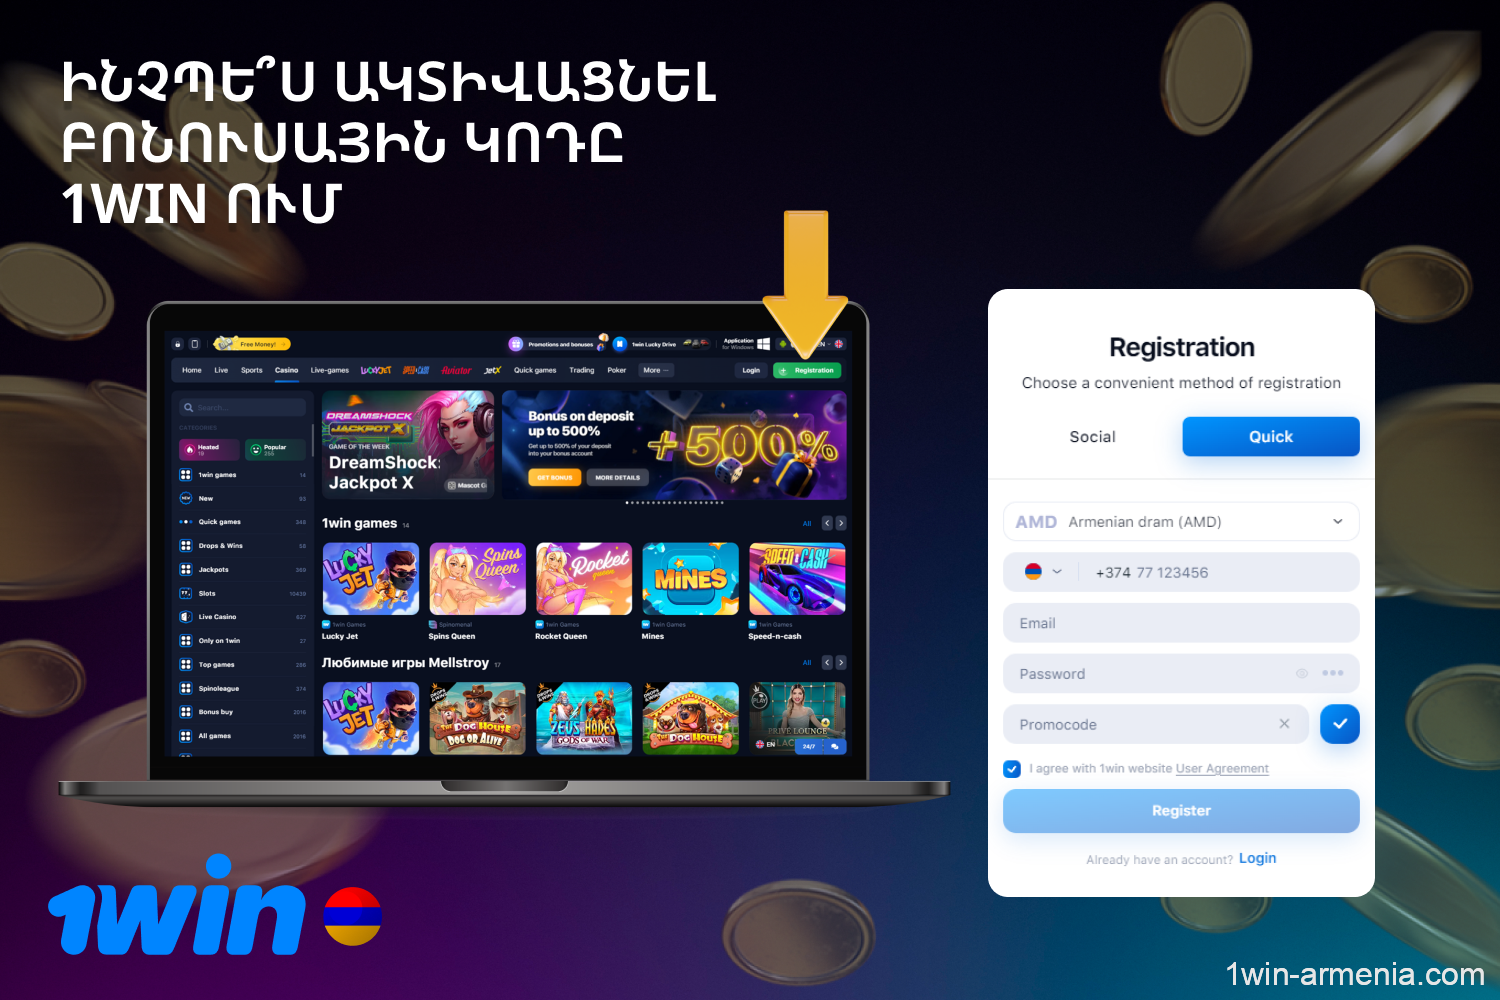 To activate the 1win promo code, a user from Armenia must create an account and enter the promotional code in a special field